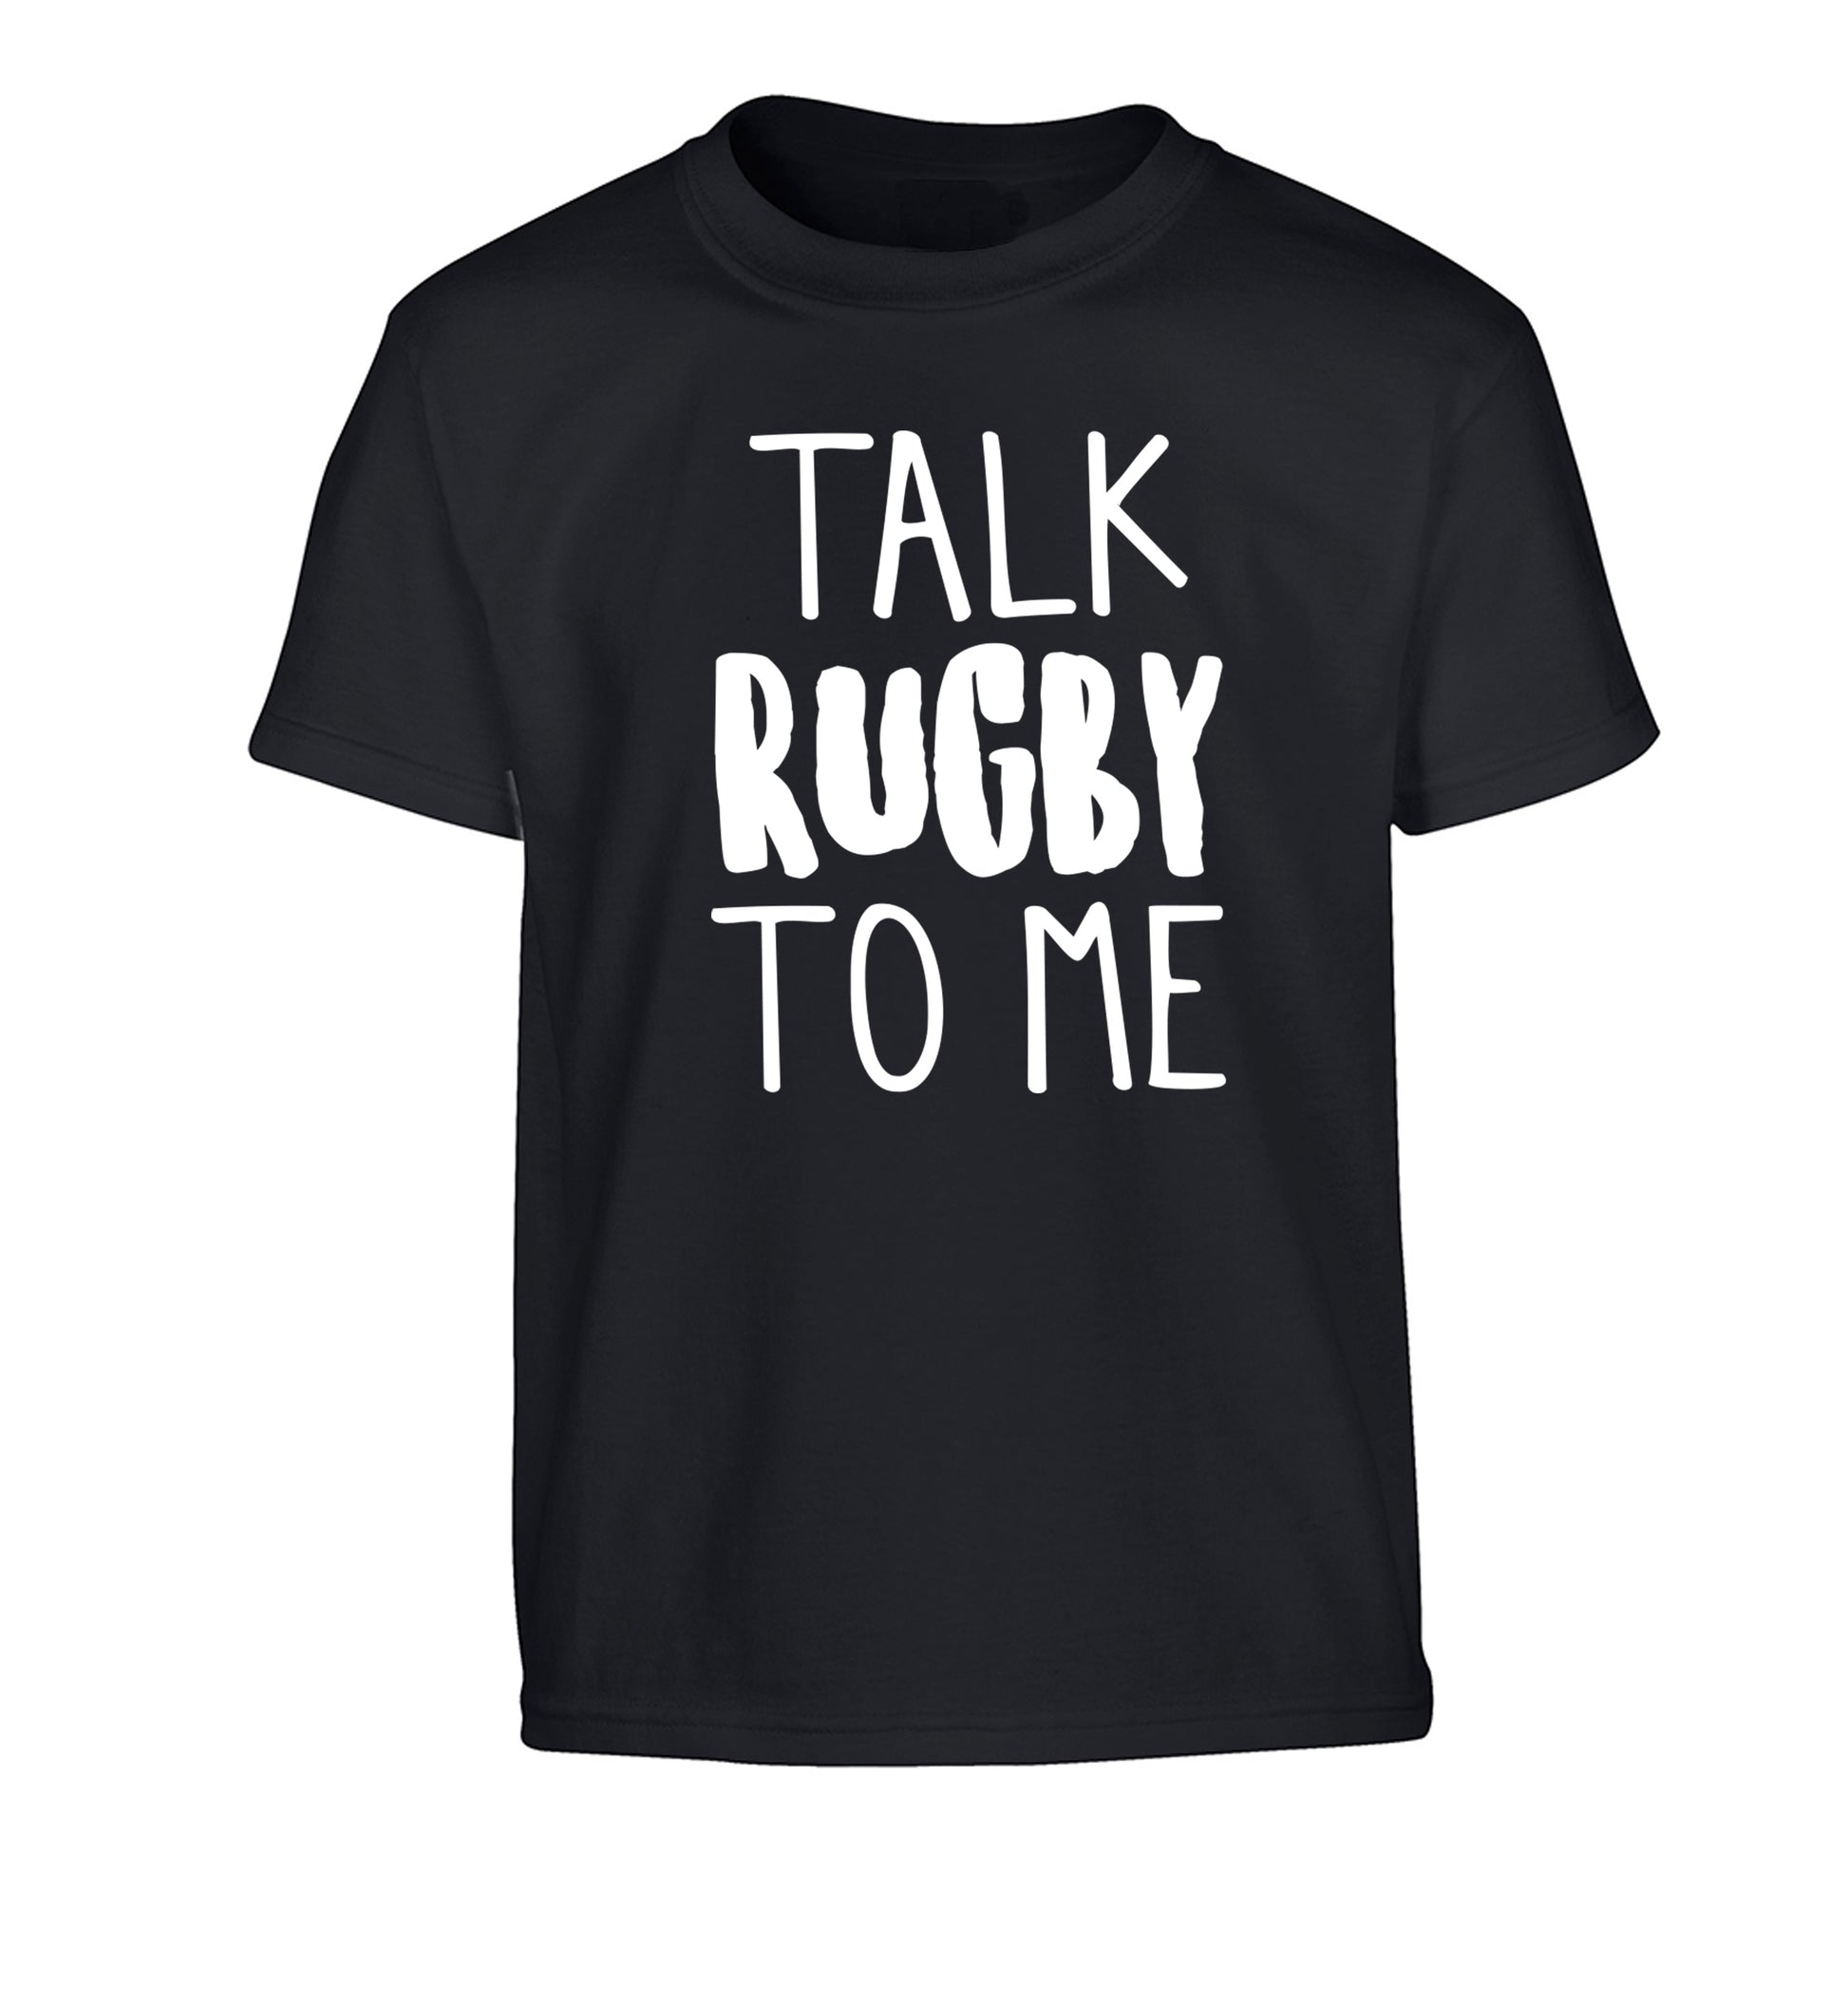 Talk rugby to me Children's black Tshirt 12-13 Years